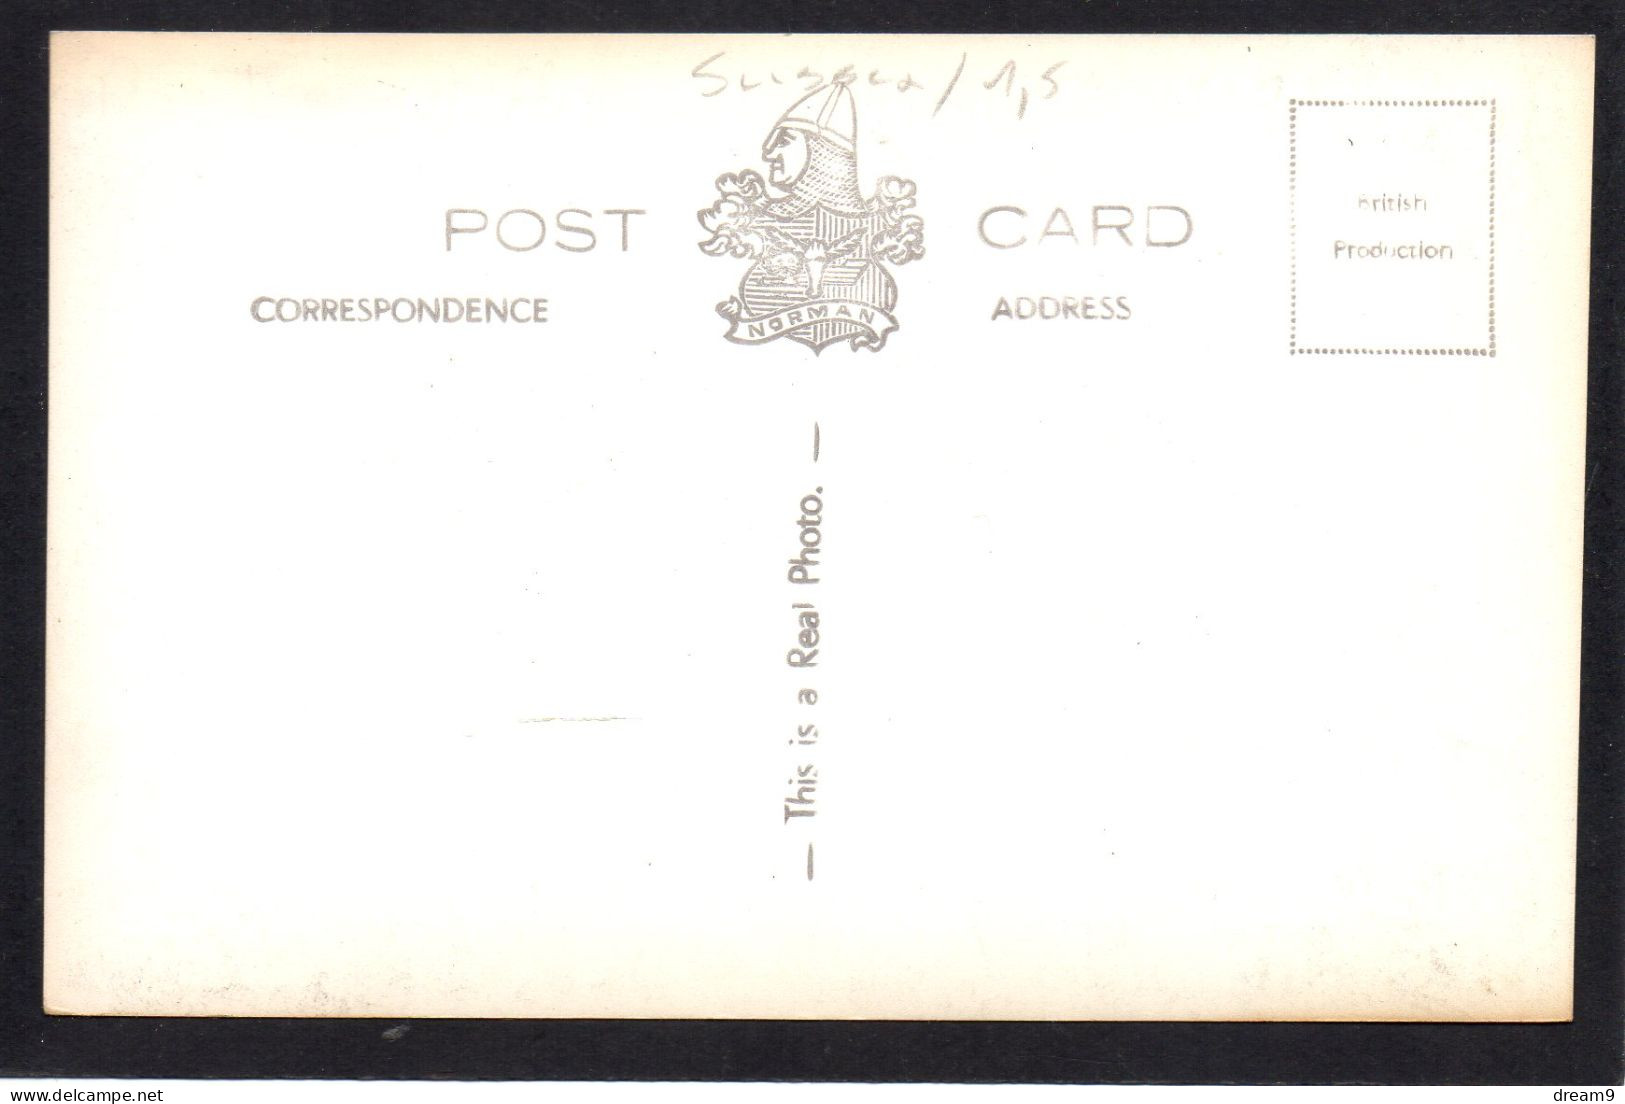 ROYAUME UNIS - ANGLETERRE - BEXILL ON SEA - The Sands Looking West - Other & Unclassified